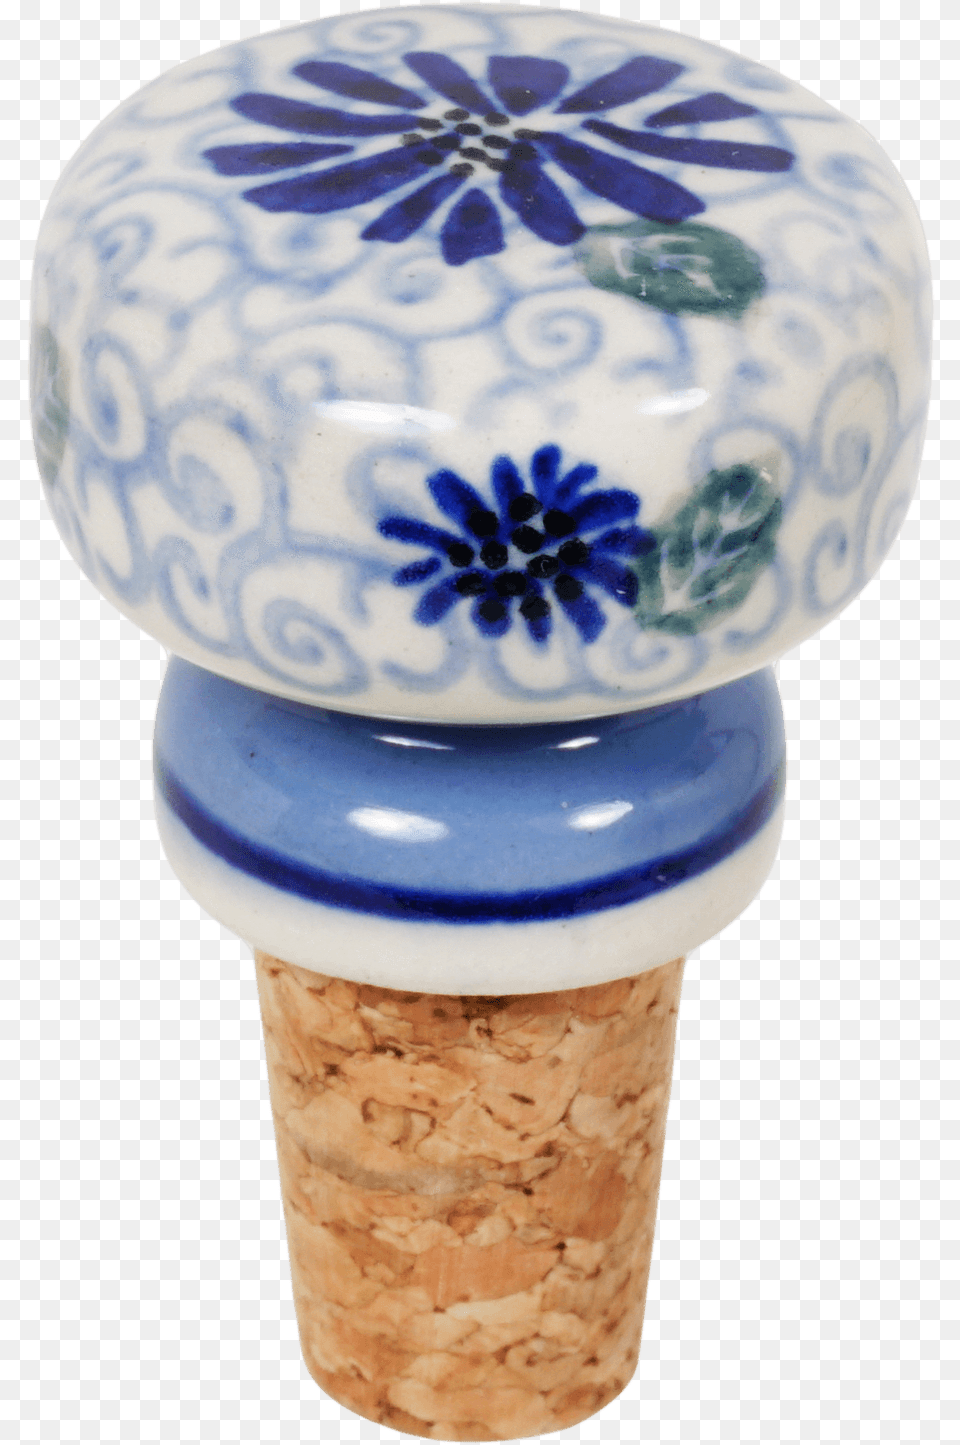 Class Lazyload Lazyload Mirage Cloudzoom Featured Blue And White Porcelain, Cork, Plate Png Image